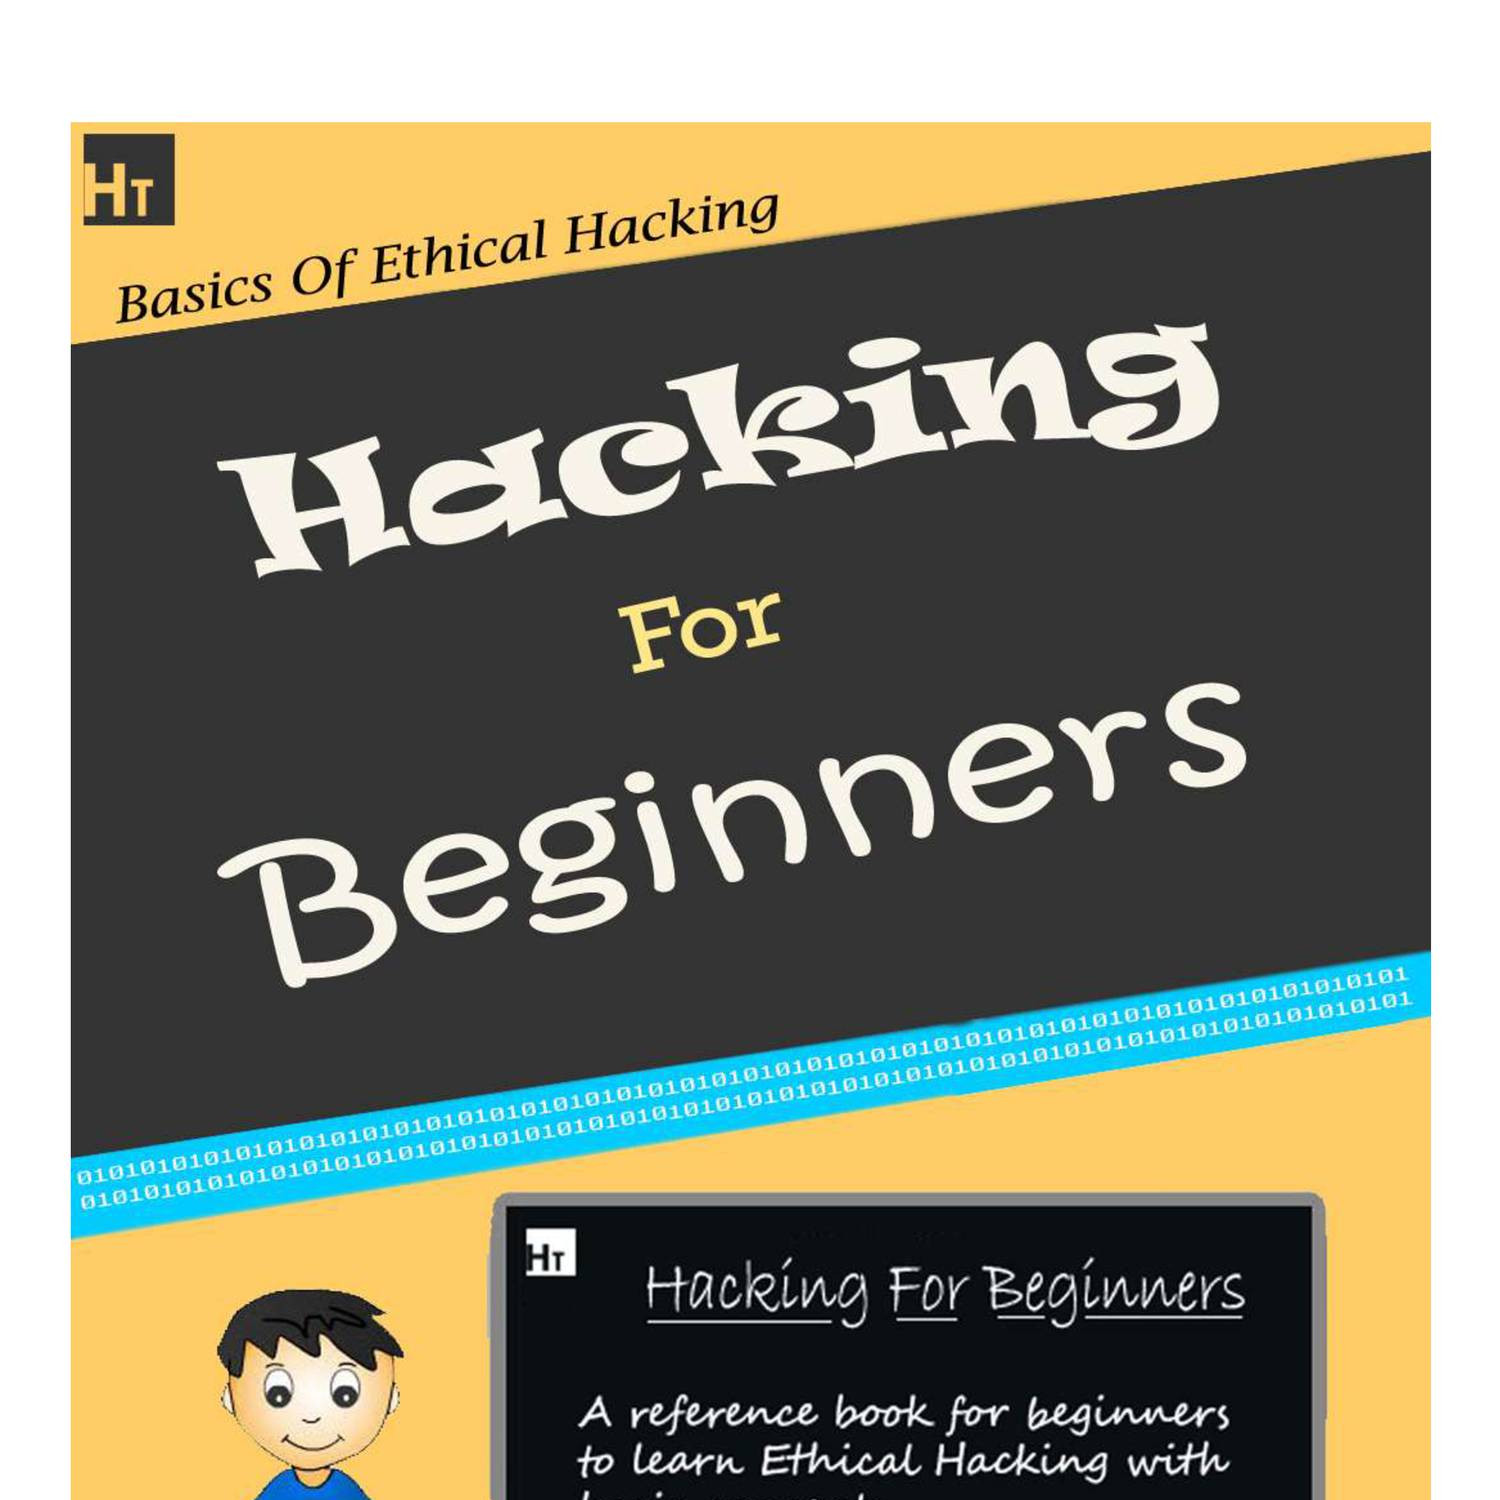 learn ethical hacking pdf